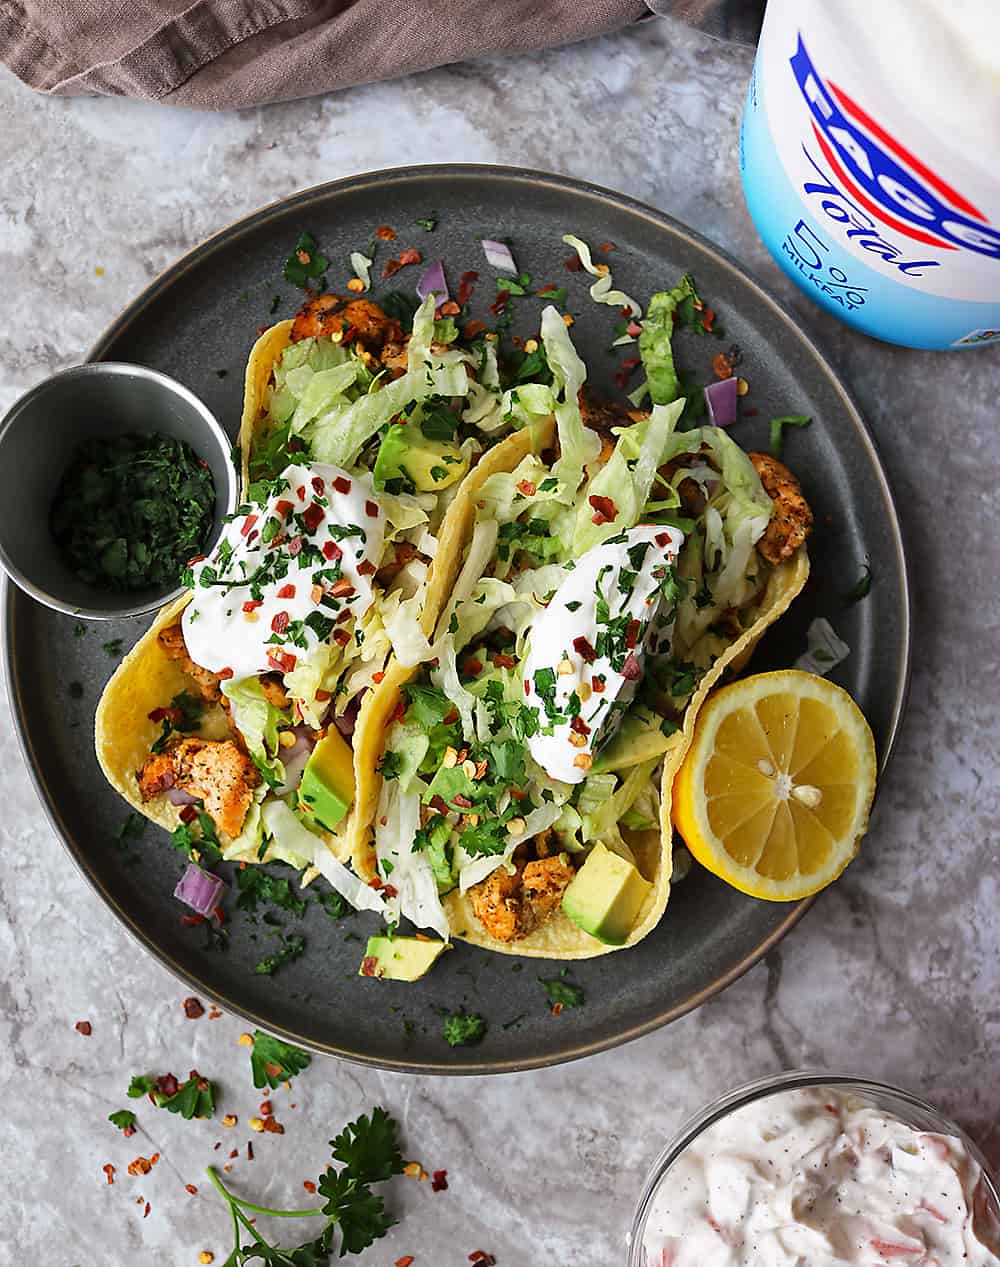 How about fish tacos for dinner with FAGE!